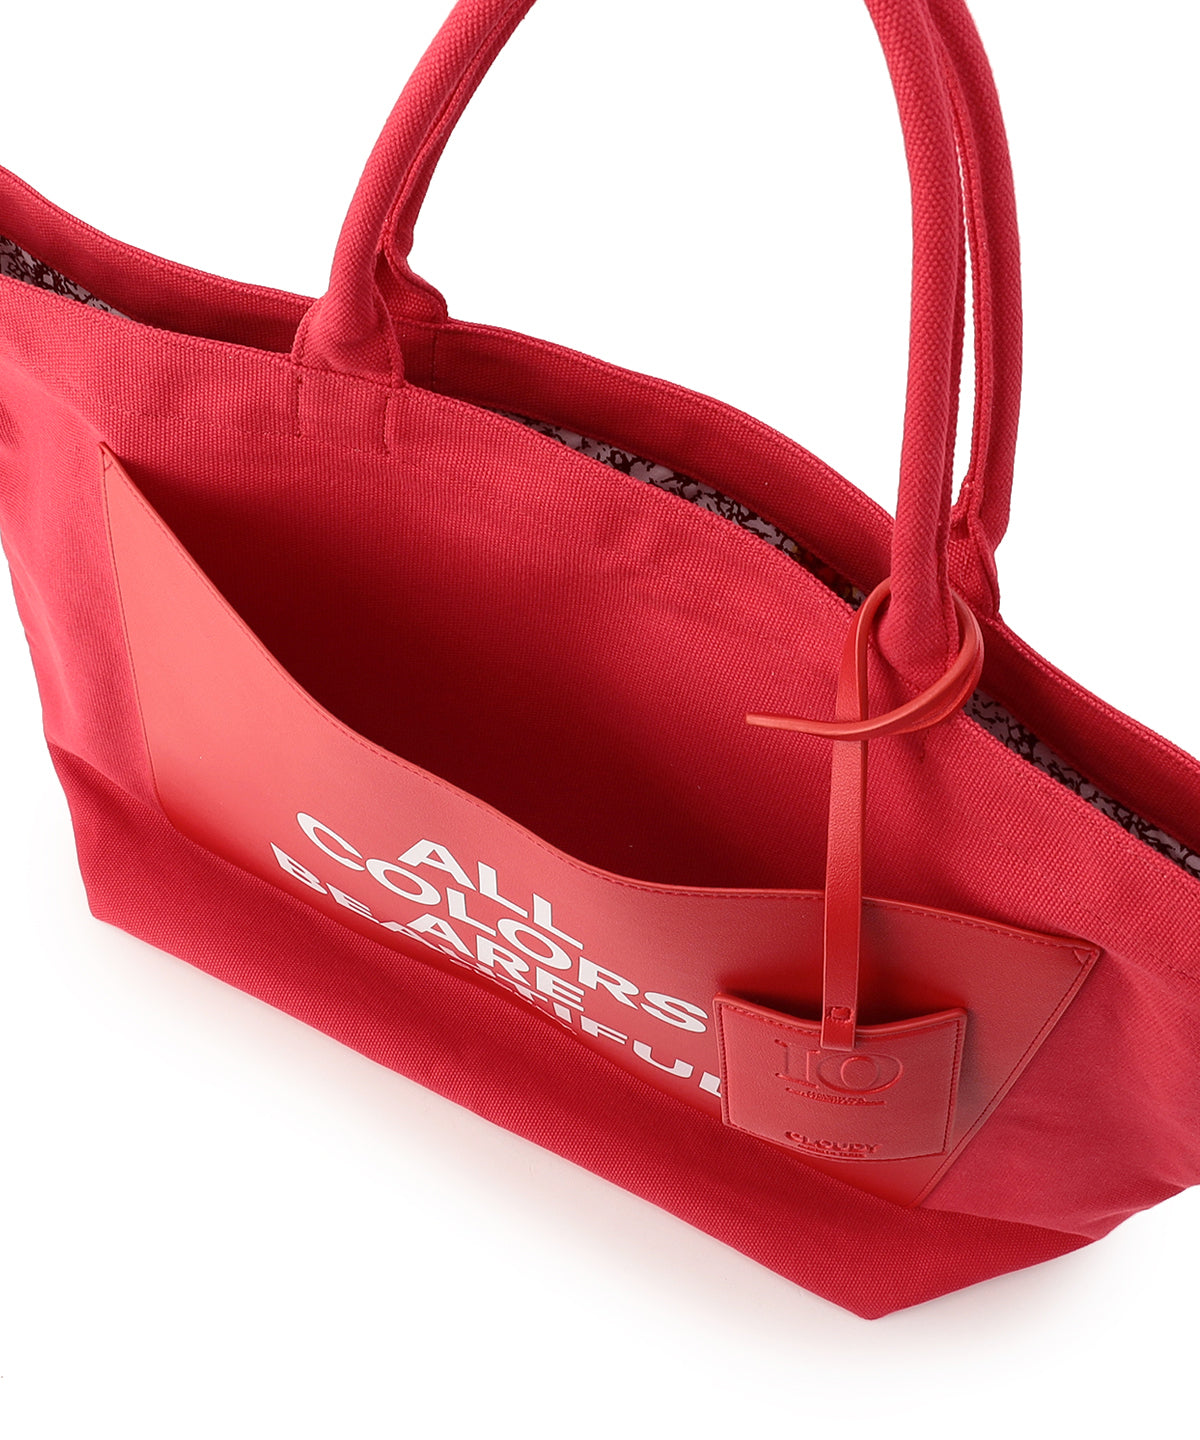 【EC限定】Colored Canvas Tote (Large) RED